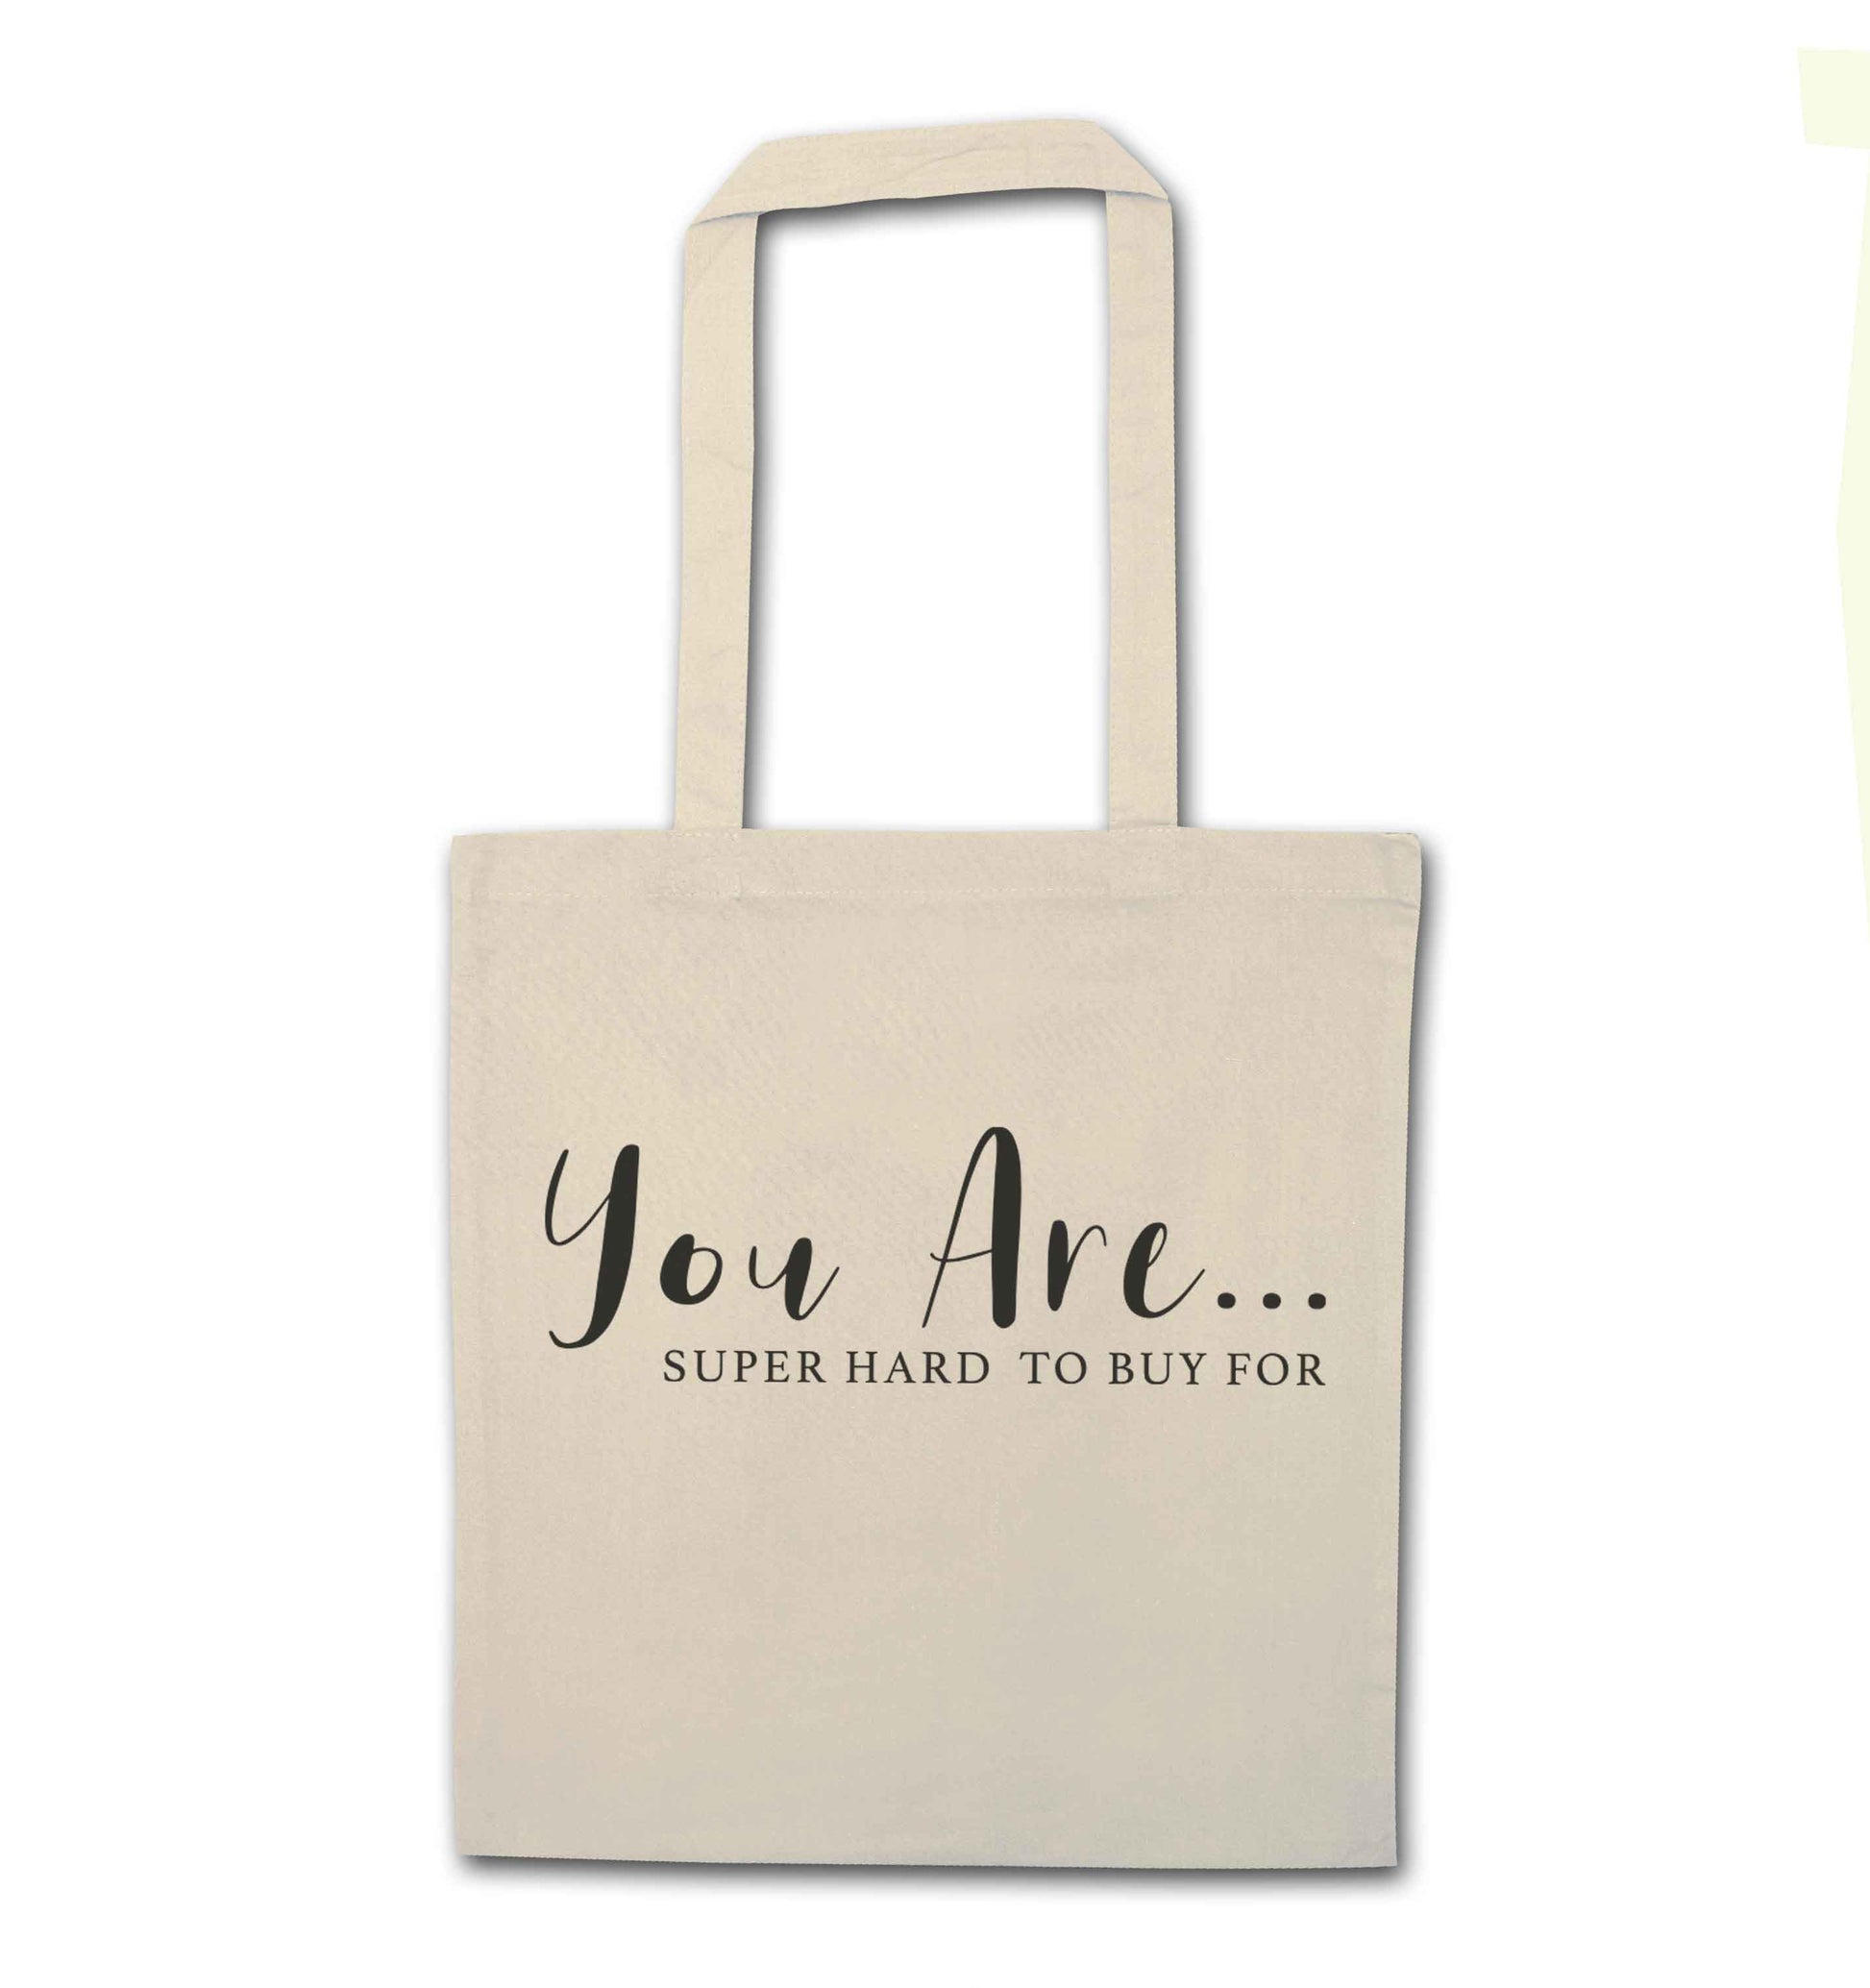 You are super hard to buy for natural tote bag